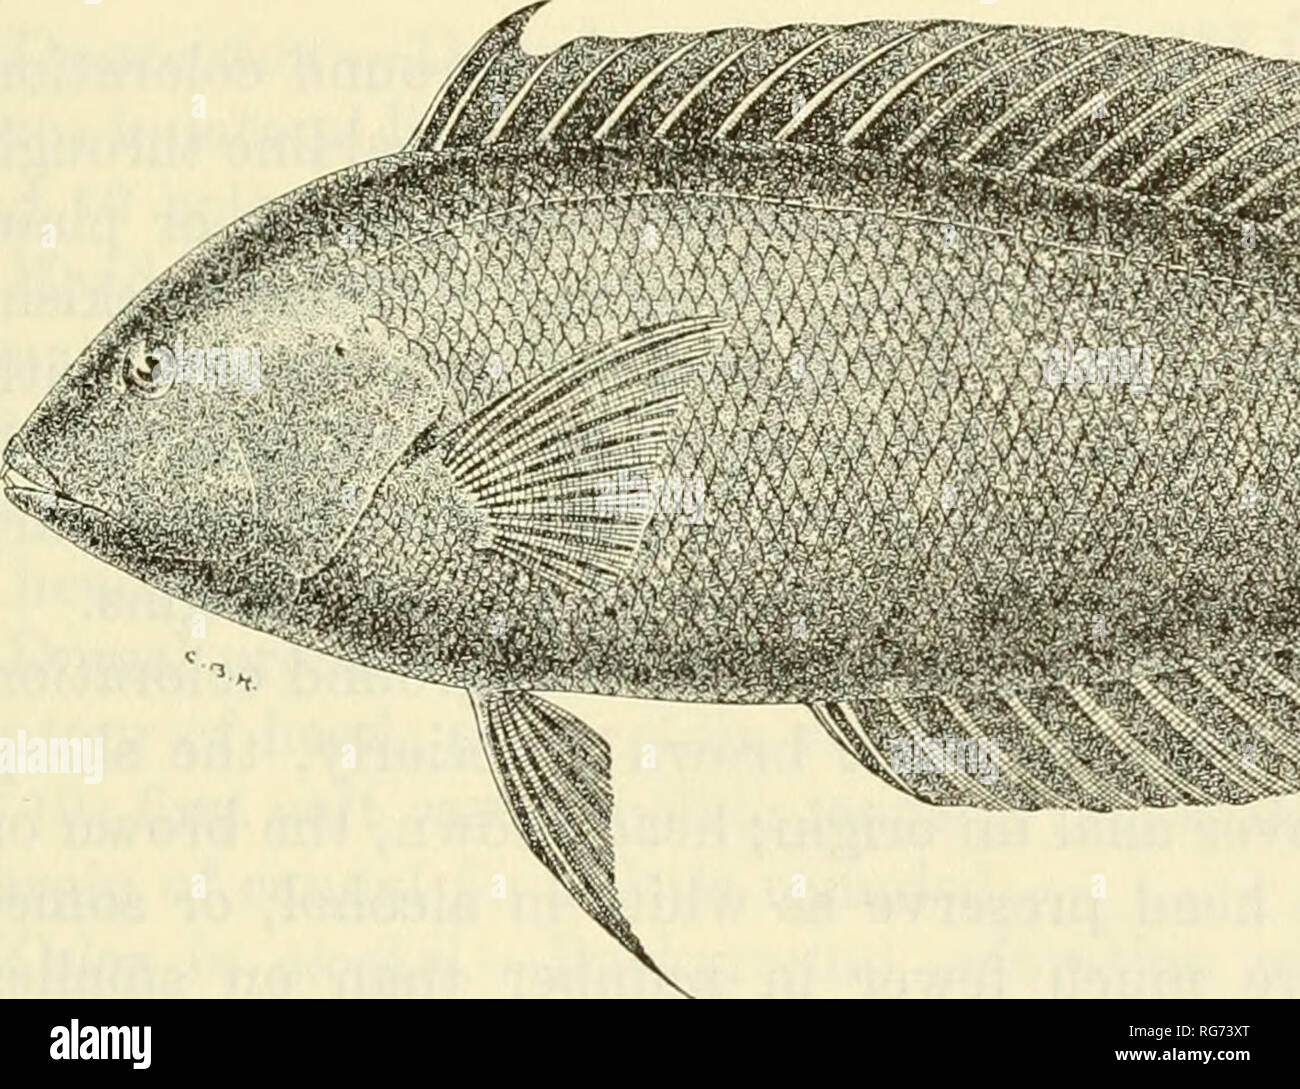 . Bulletin - United States National Museum. Science. FAMILY LABRIDAE—SCHULTZ 181 COBIS AYGULA Lacep€de Figure 99; Plate 98,D,E,F Coris aygula LACEpfcoE, Histoire naturelle des poissons, vol. 3, pp. 96, 97, pi. 4, lower figure, 1802 (no locality).—Seale, Occ. Pap., Bishop Mus., vol. 1, No. 3, p. 87, 1901 (Guam). Coris angulatus Lacep^de, Histoire naturelle des poissons, vol. 3, pp. 97, 99, pi. 4, middle figure (no locality). SPECIMENS STUDIED Bikini Atoll: 9 stations, 21 specimens, 34 to 215 mm. in standard length. Rongerik Atoll: 1 station, 2 specimens, 40 to 41 mm. Rongelap Atoll: 5 stations, Stock Photo